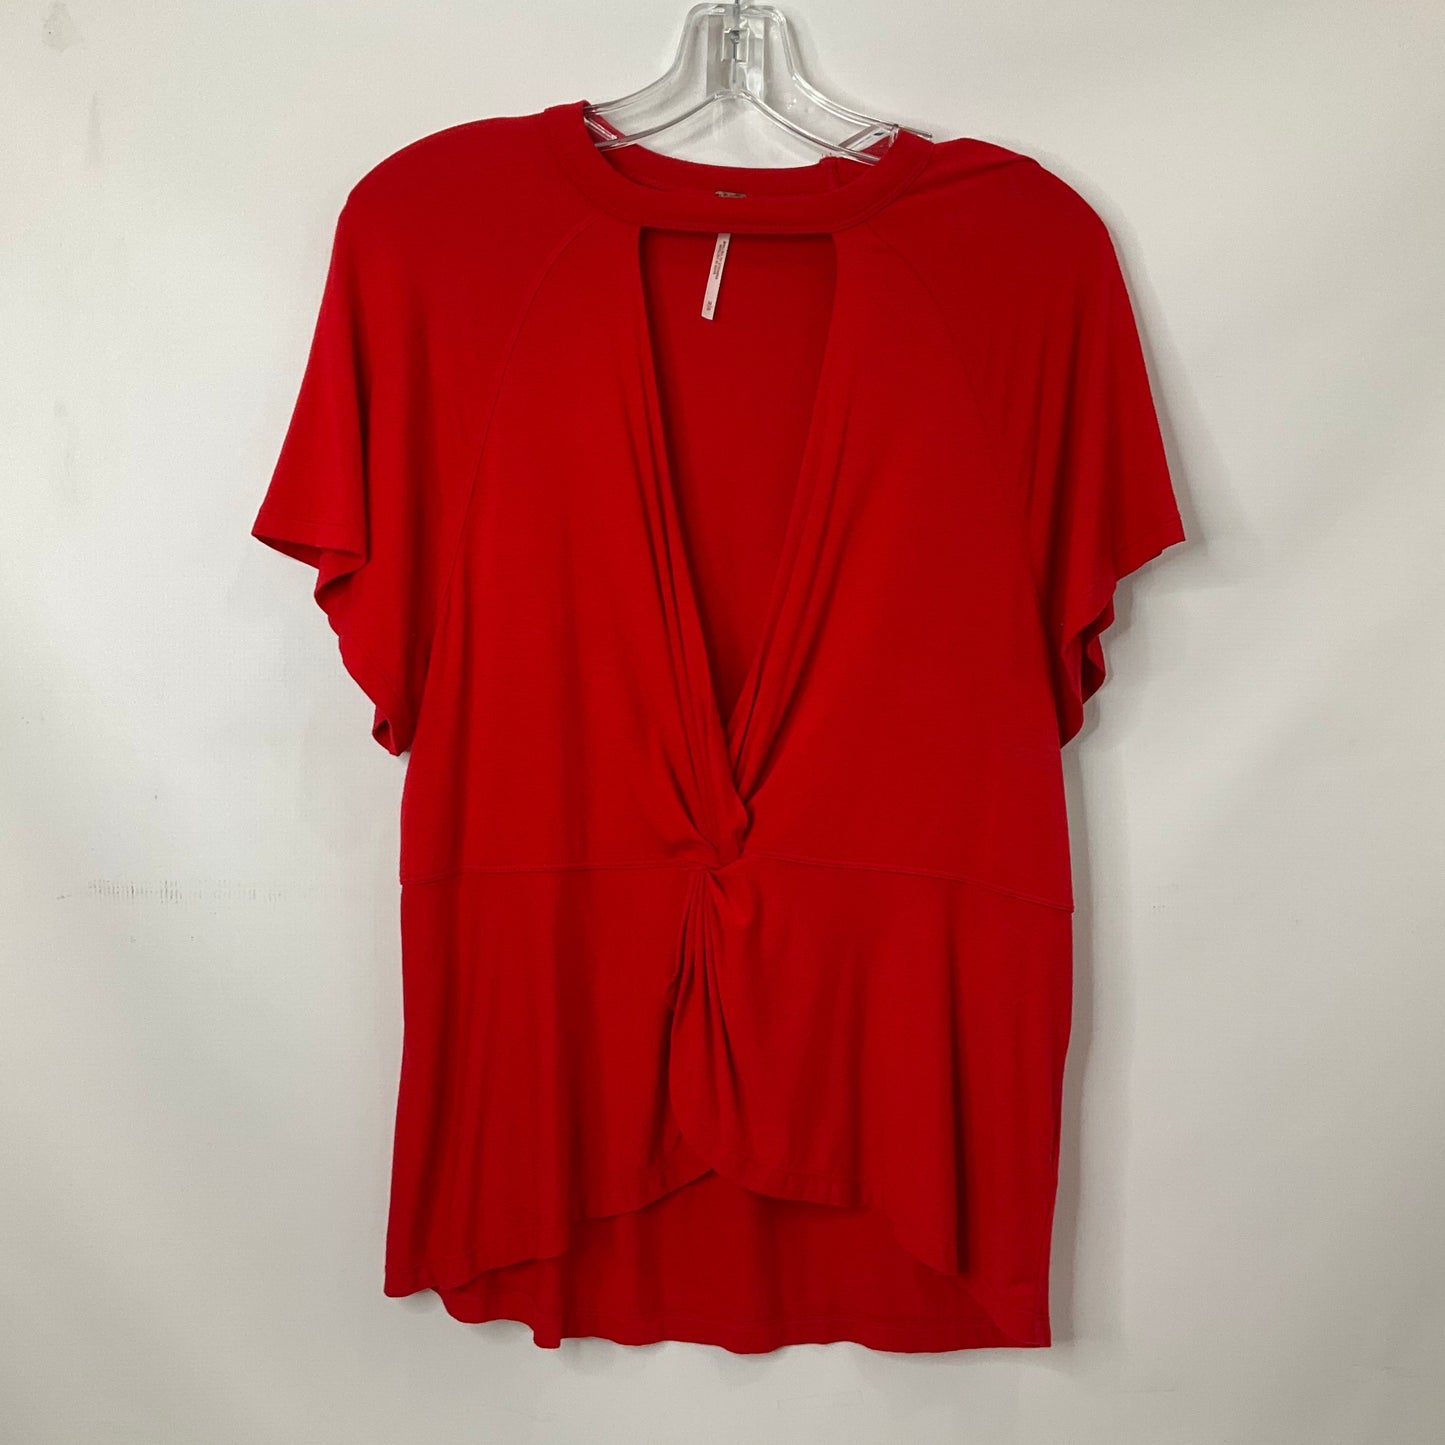 Red Top Short Sleeve Free People, Size M